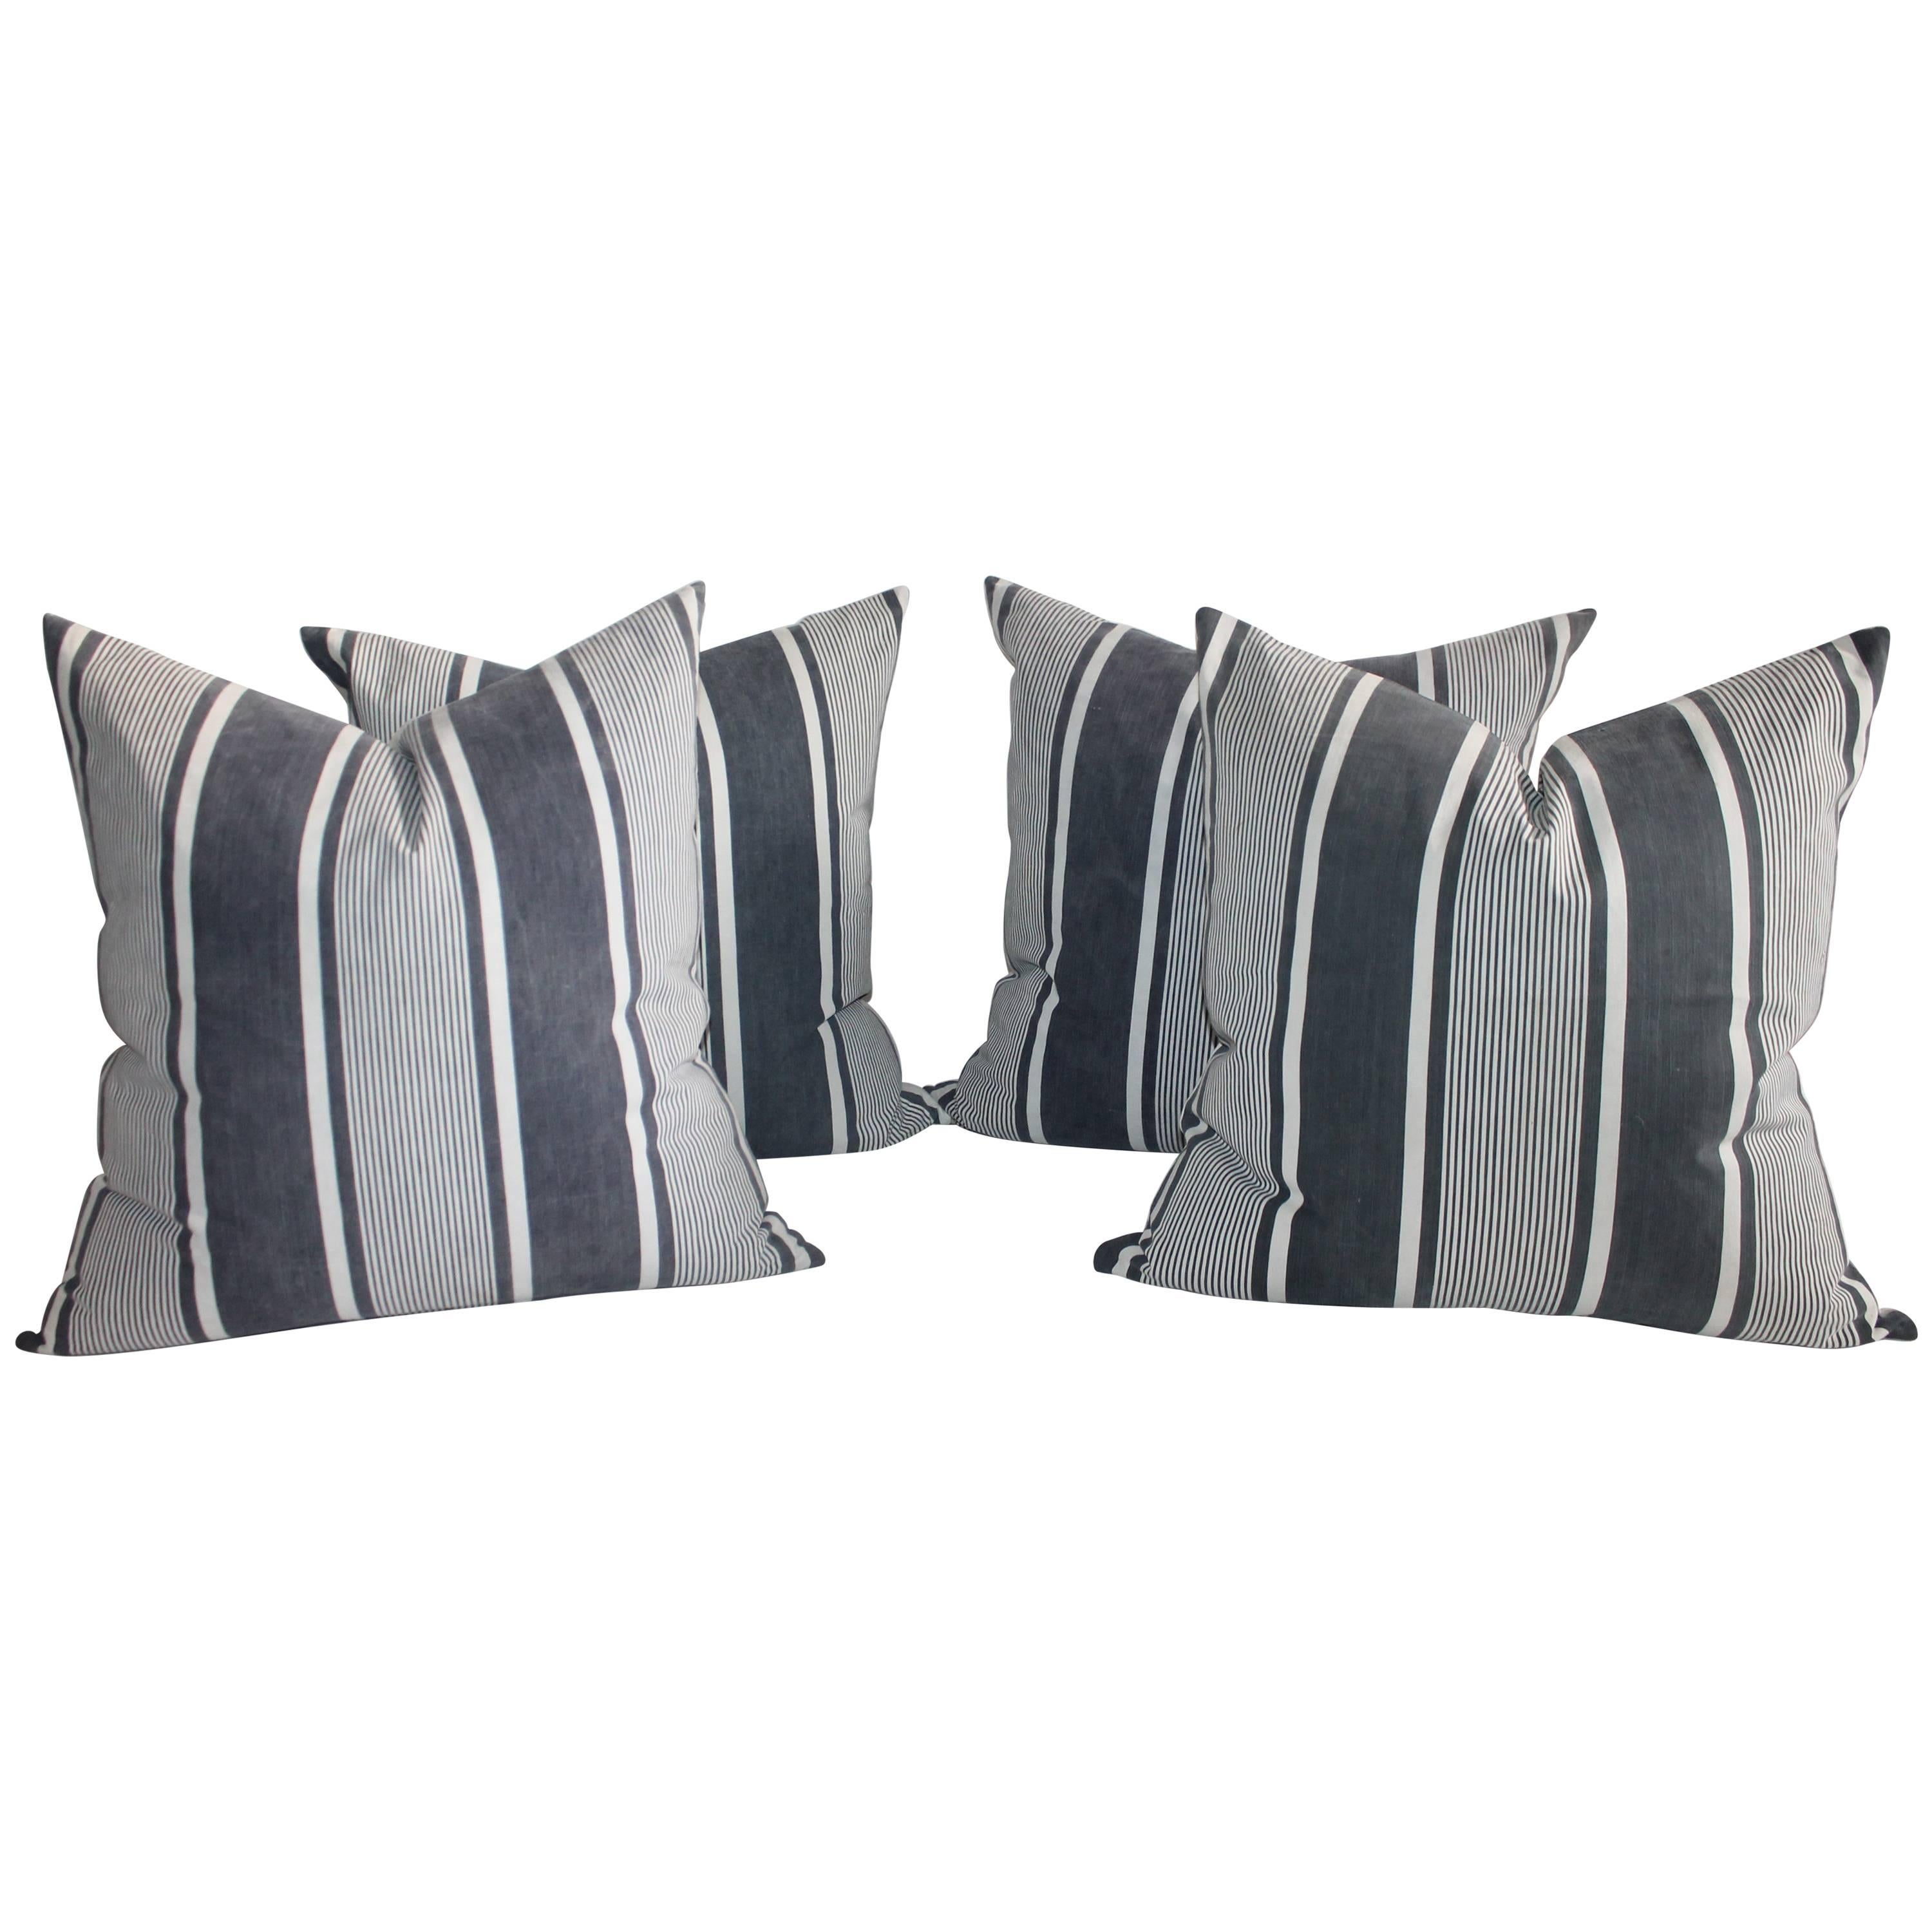 Set of Four Wide Striped 19th Century Ticking Pillows